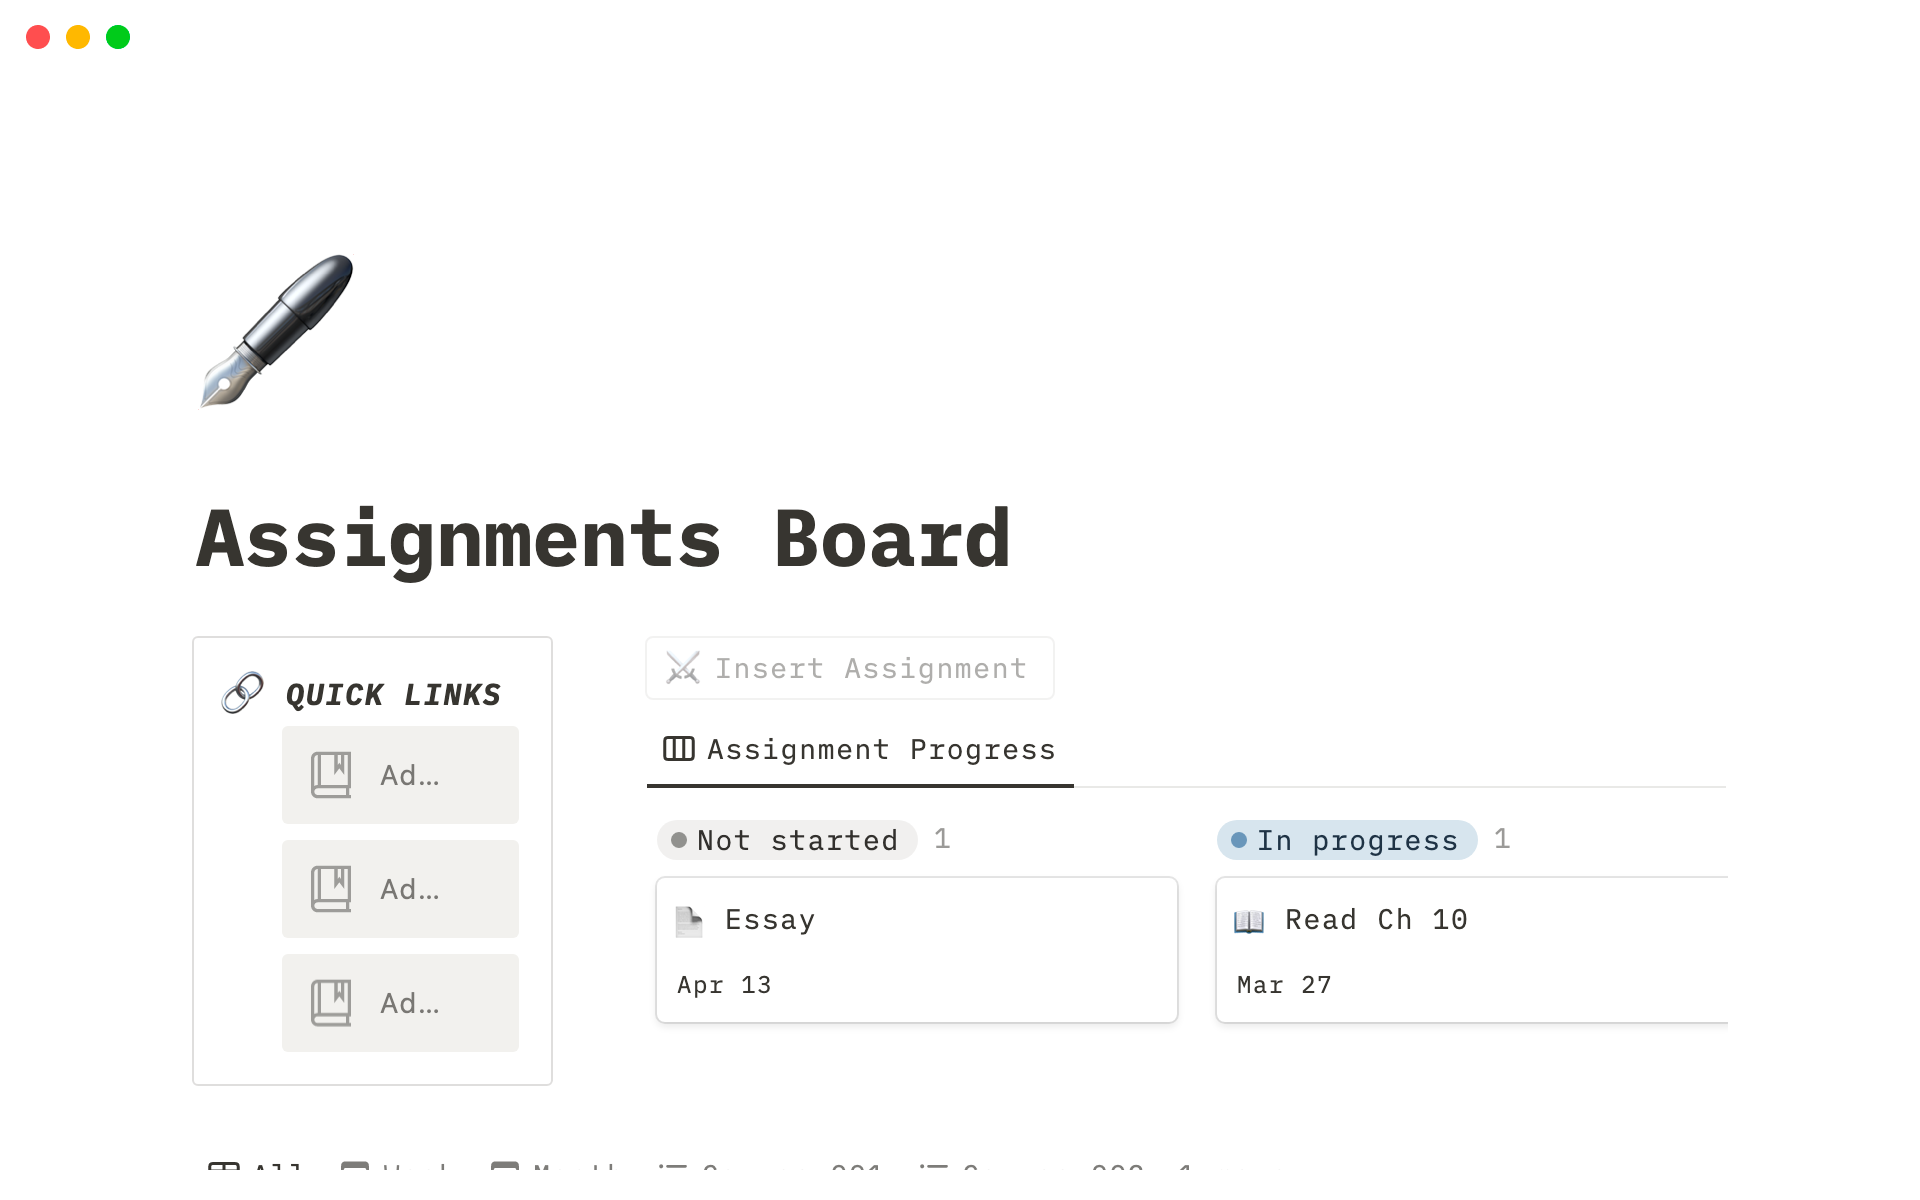 Simple assignments database with multiple filtered view types.